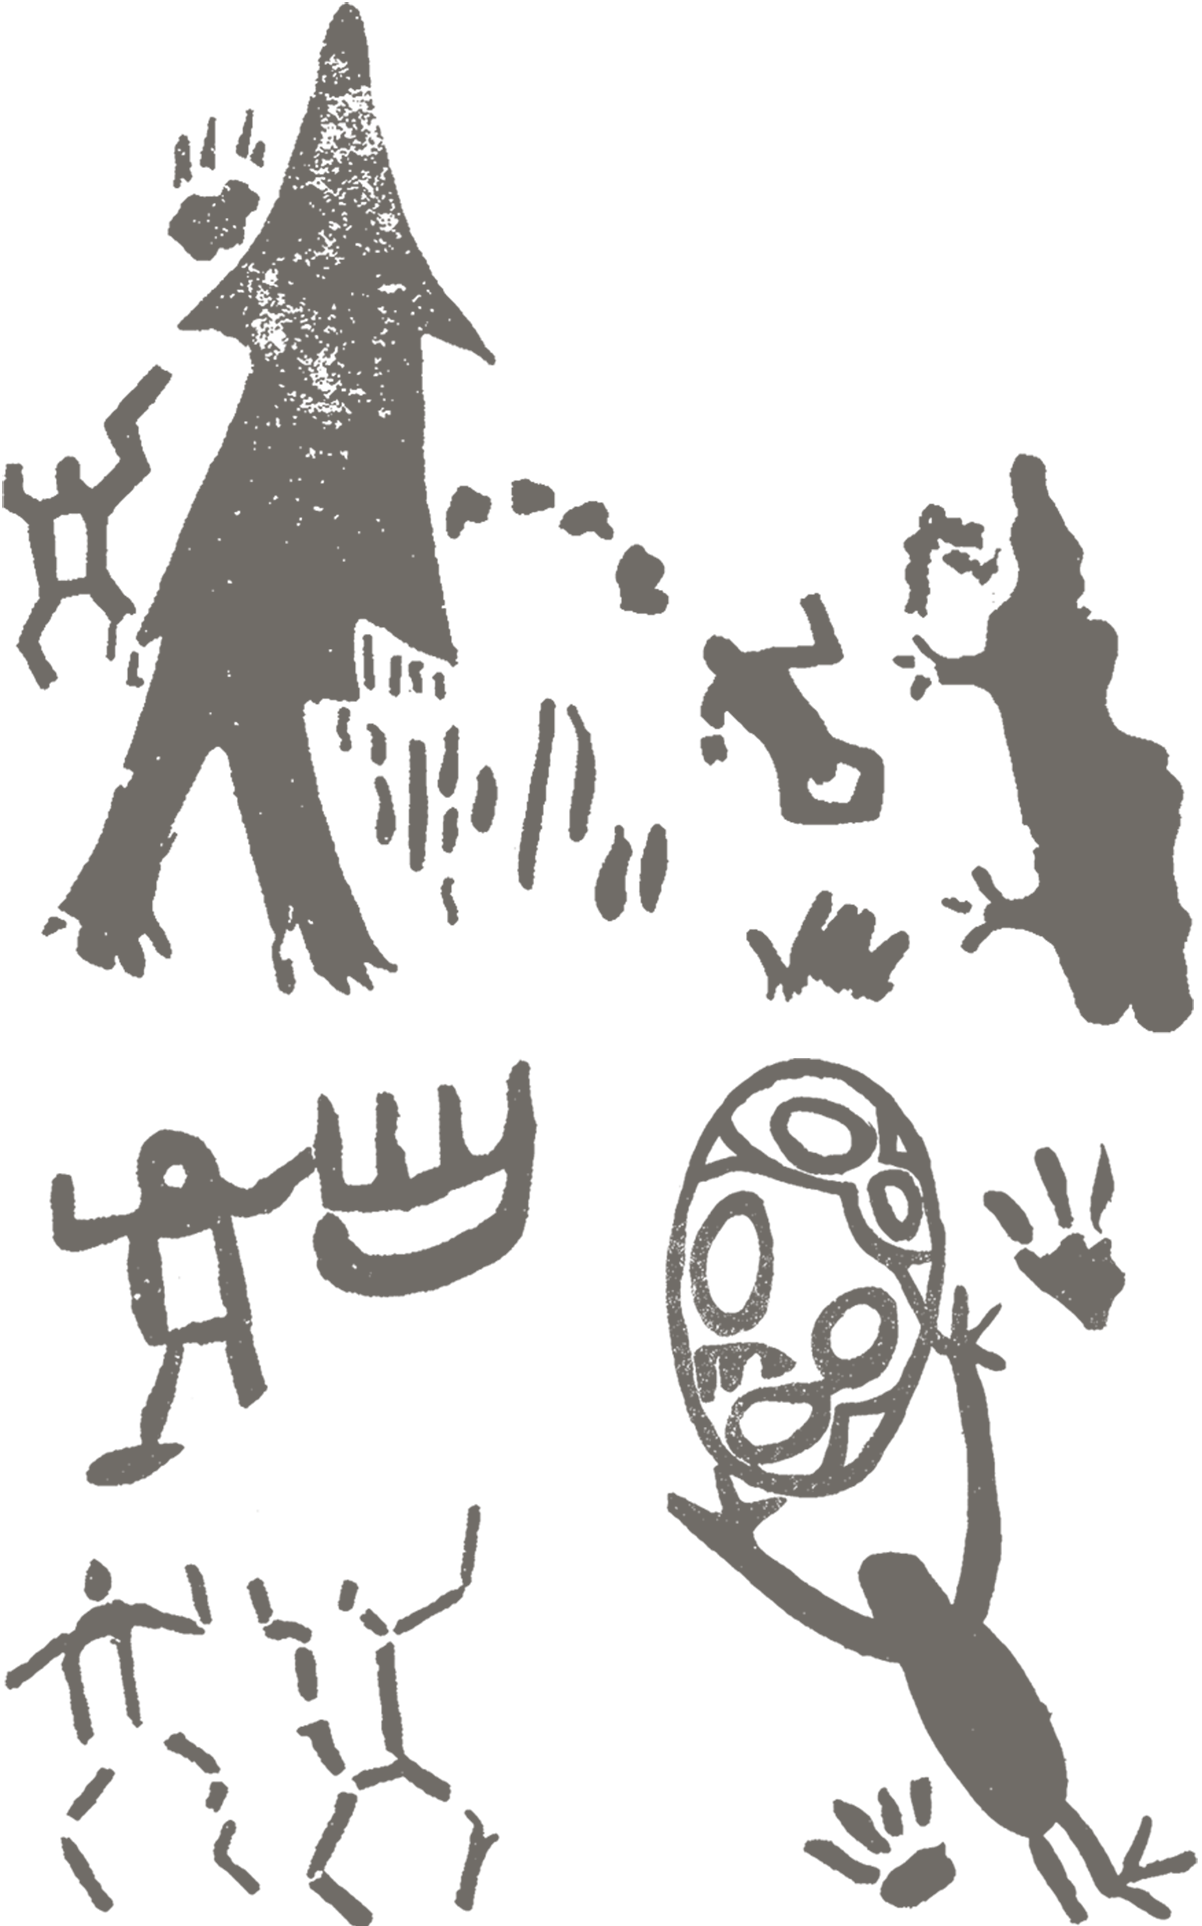 Rock Art Palau Micronesia Shapes that resemble a human body occur as stick-figures, hollow rectangles, and filled-in figures with heads, legs, and sometimes arms. Arms are often raised up as if in motion and some human-like images have facial features and spread fingers or toes